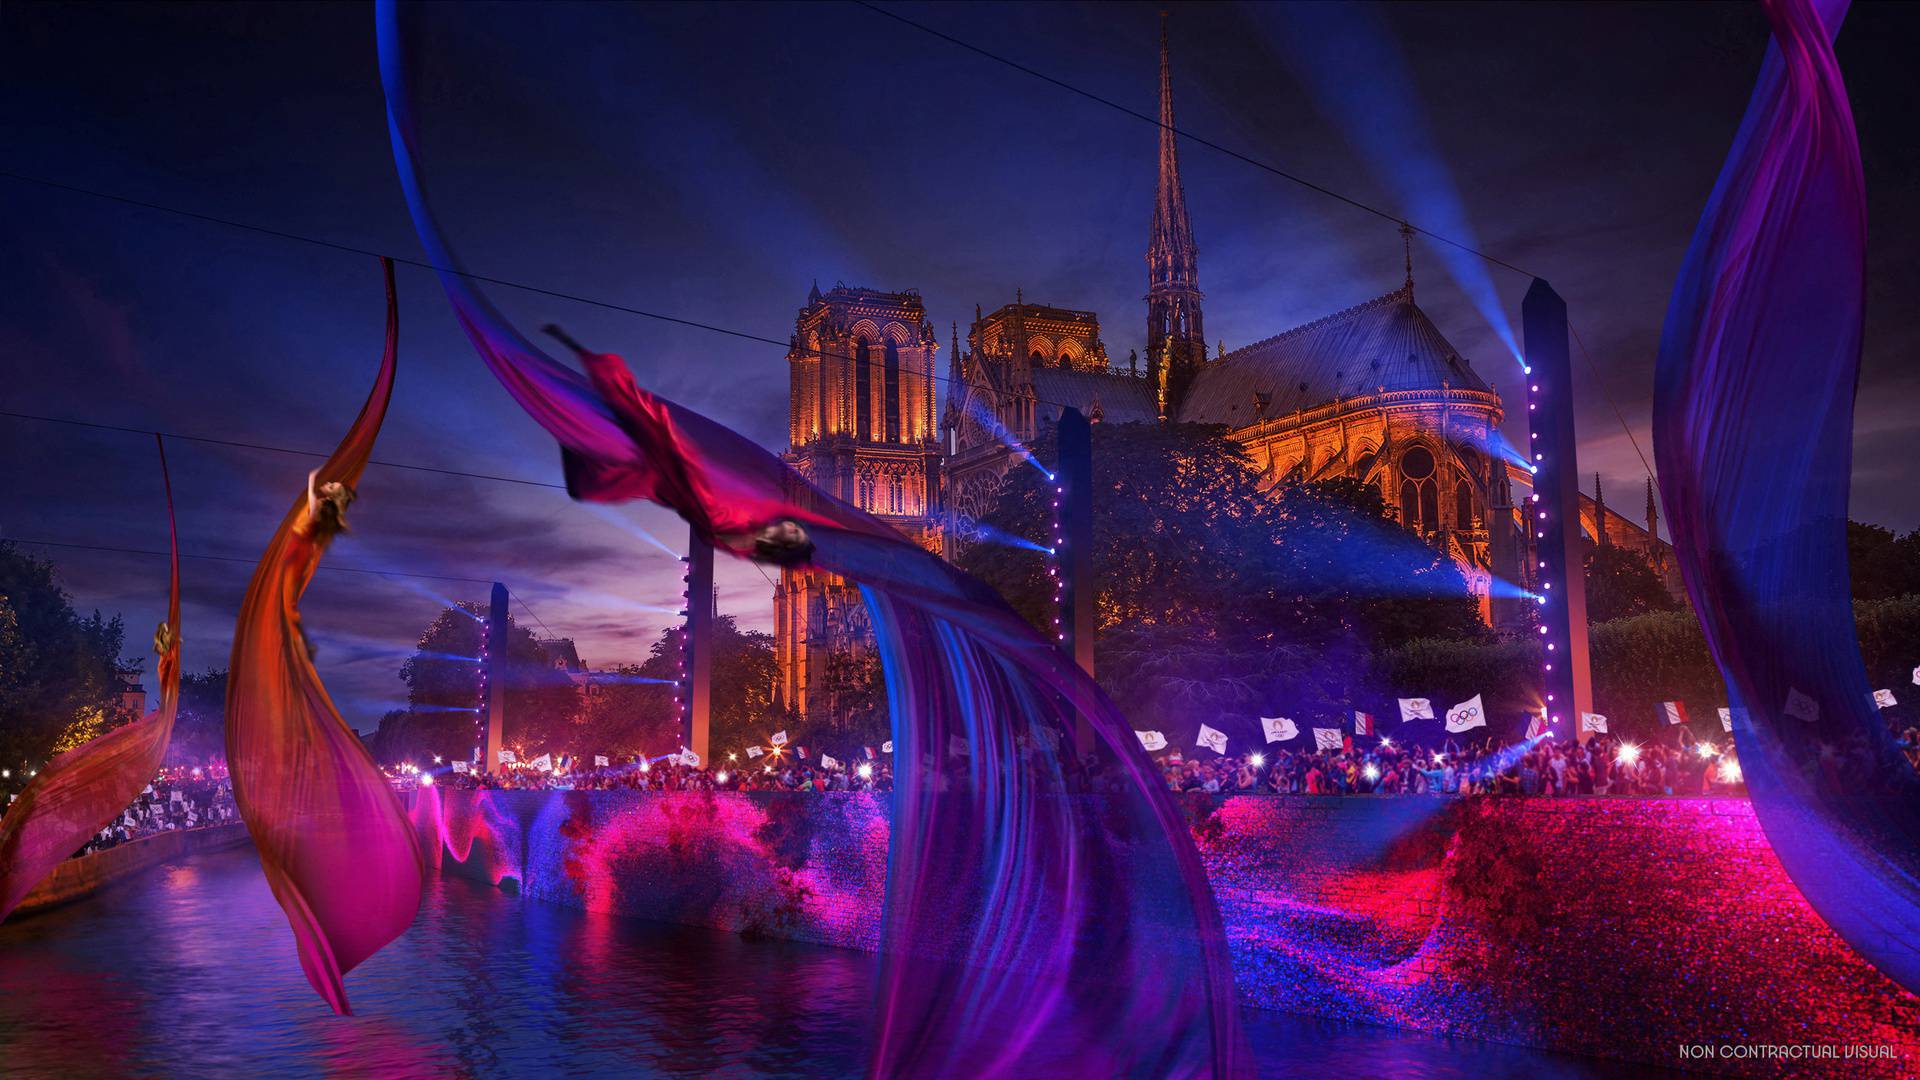 Visualisation of the 2024 Paris Olympic Games opening ceremony